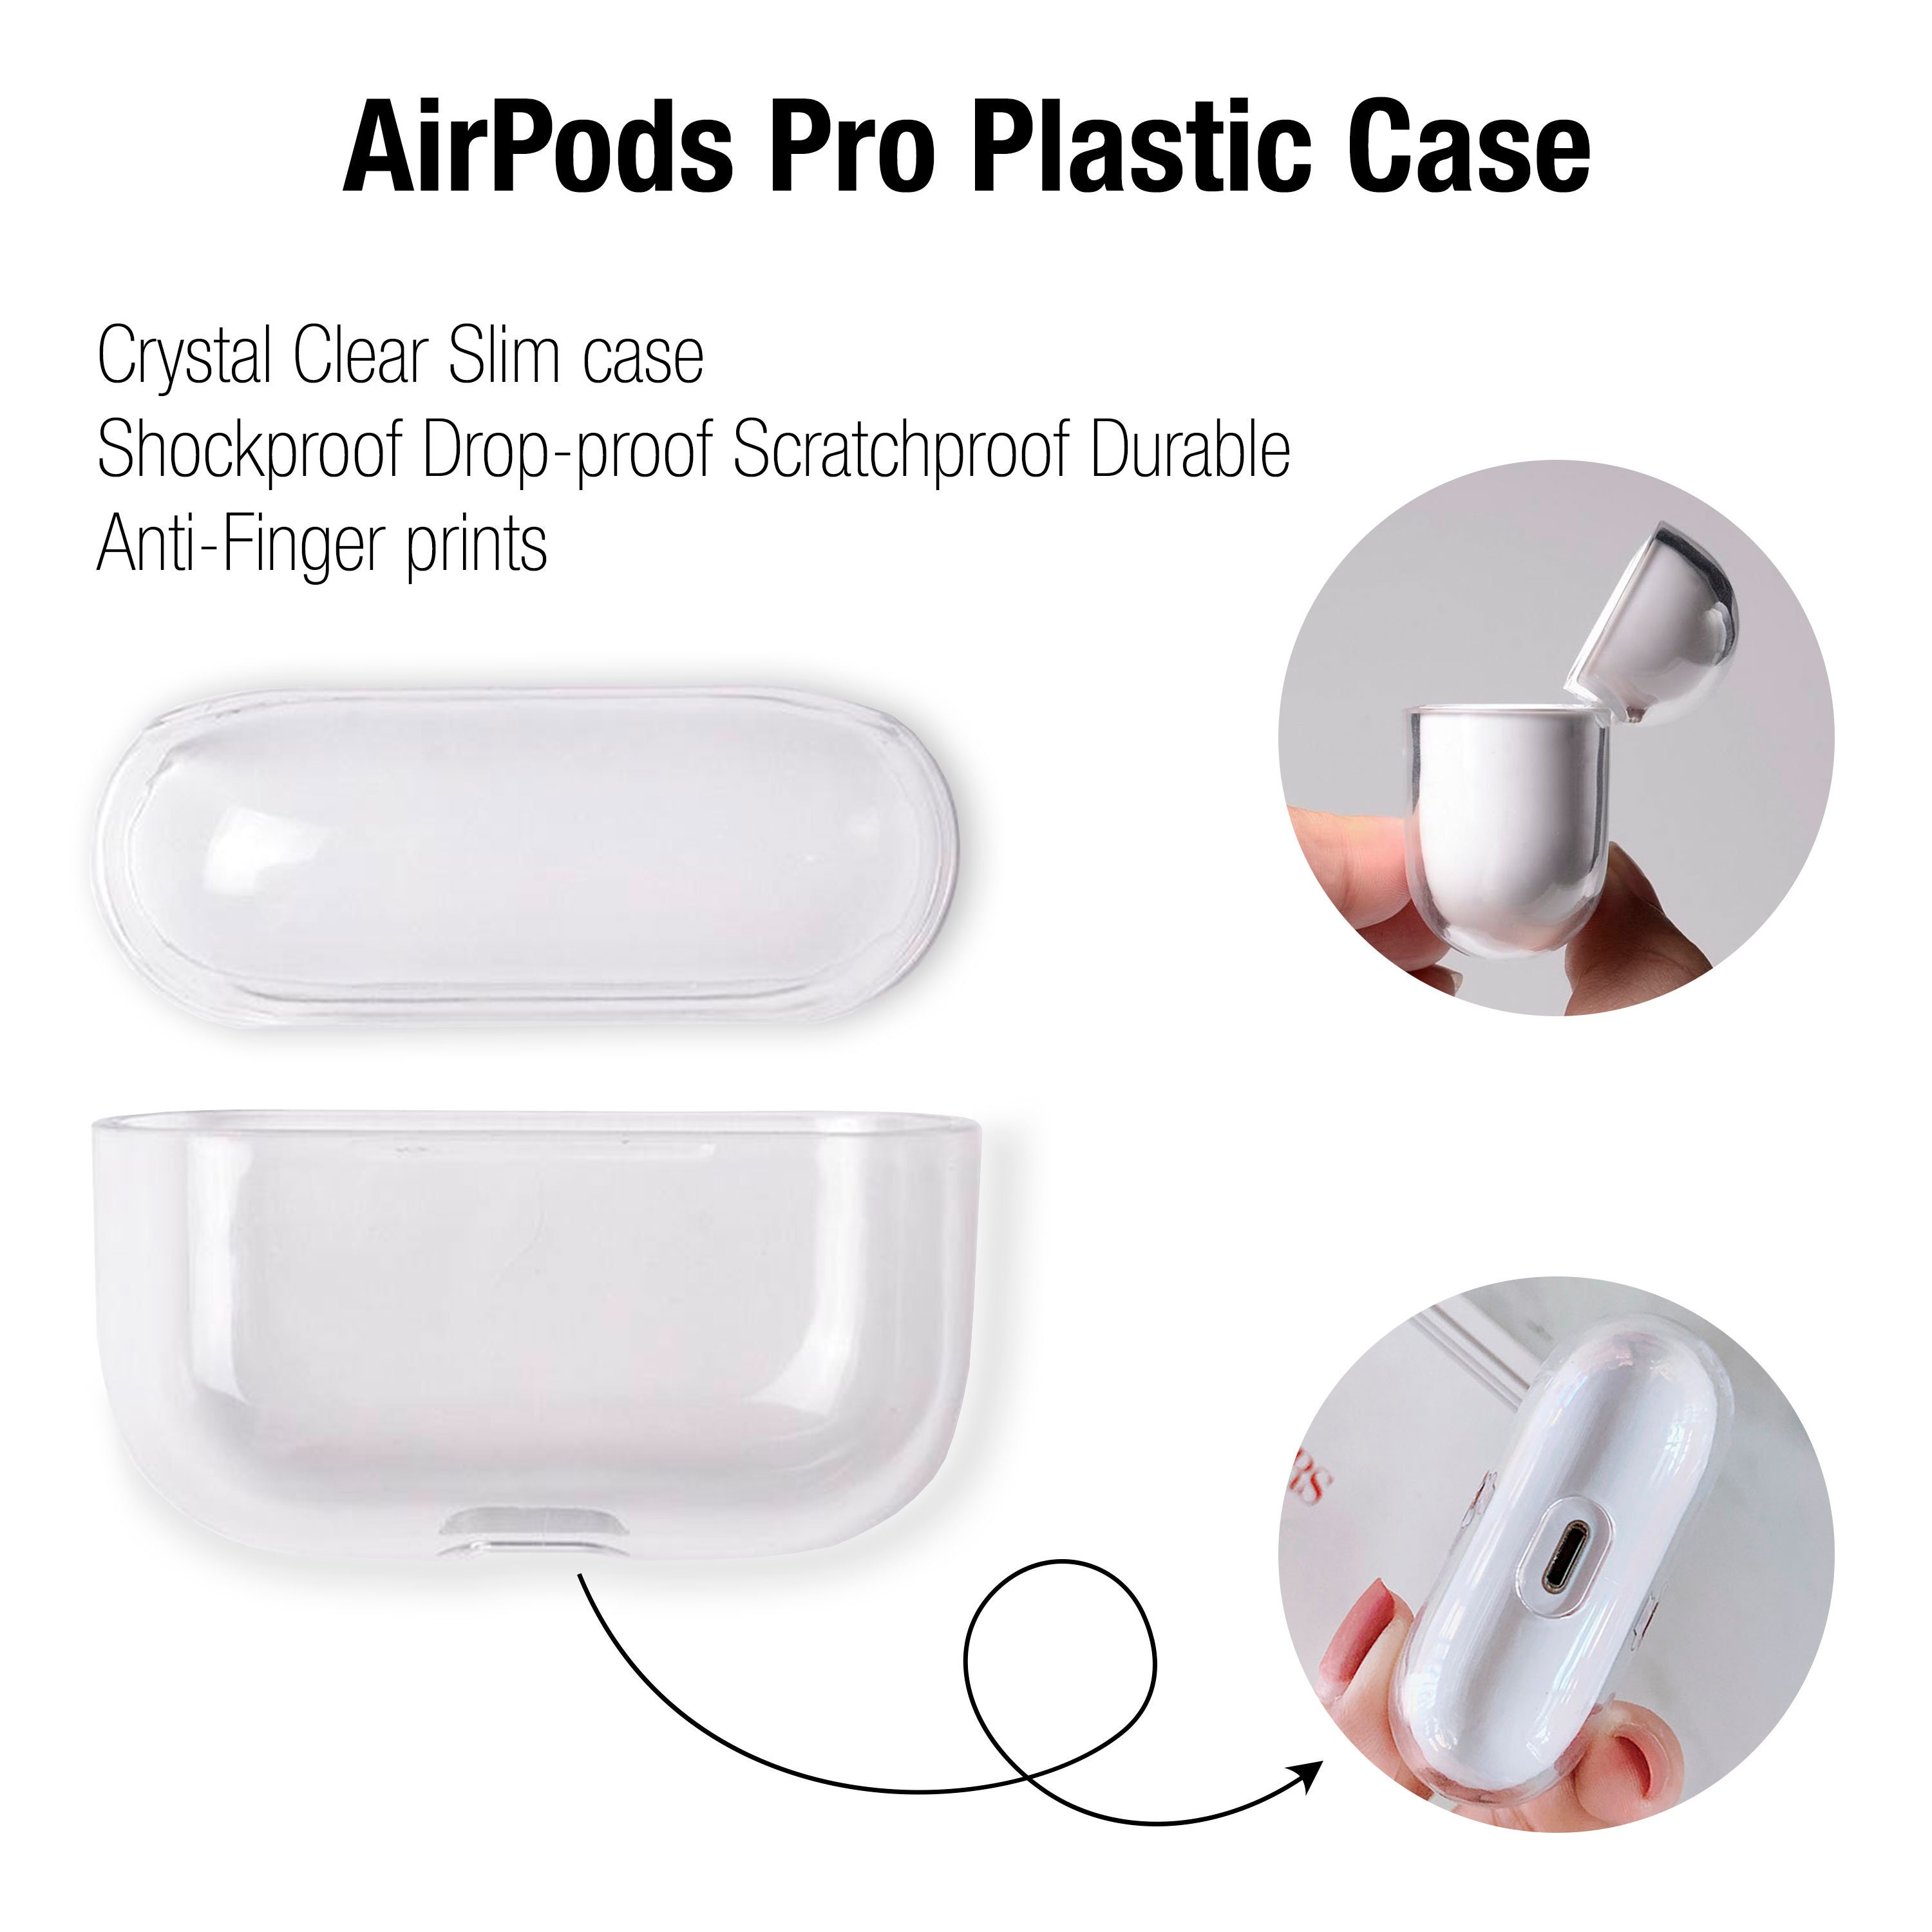 Designer AirPods Cases  How to Remove the AirPods from the Case 